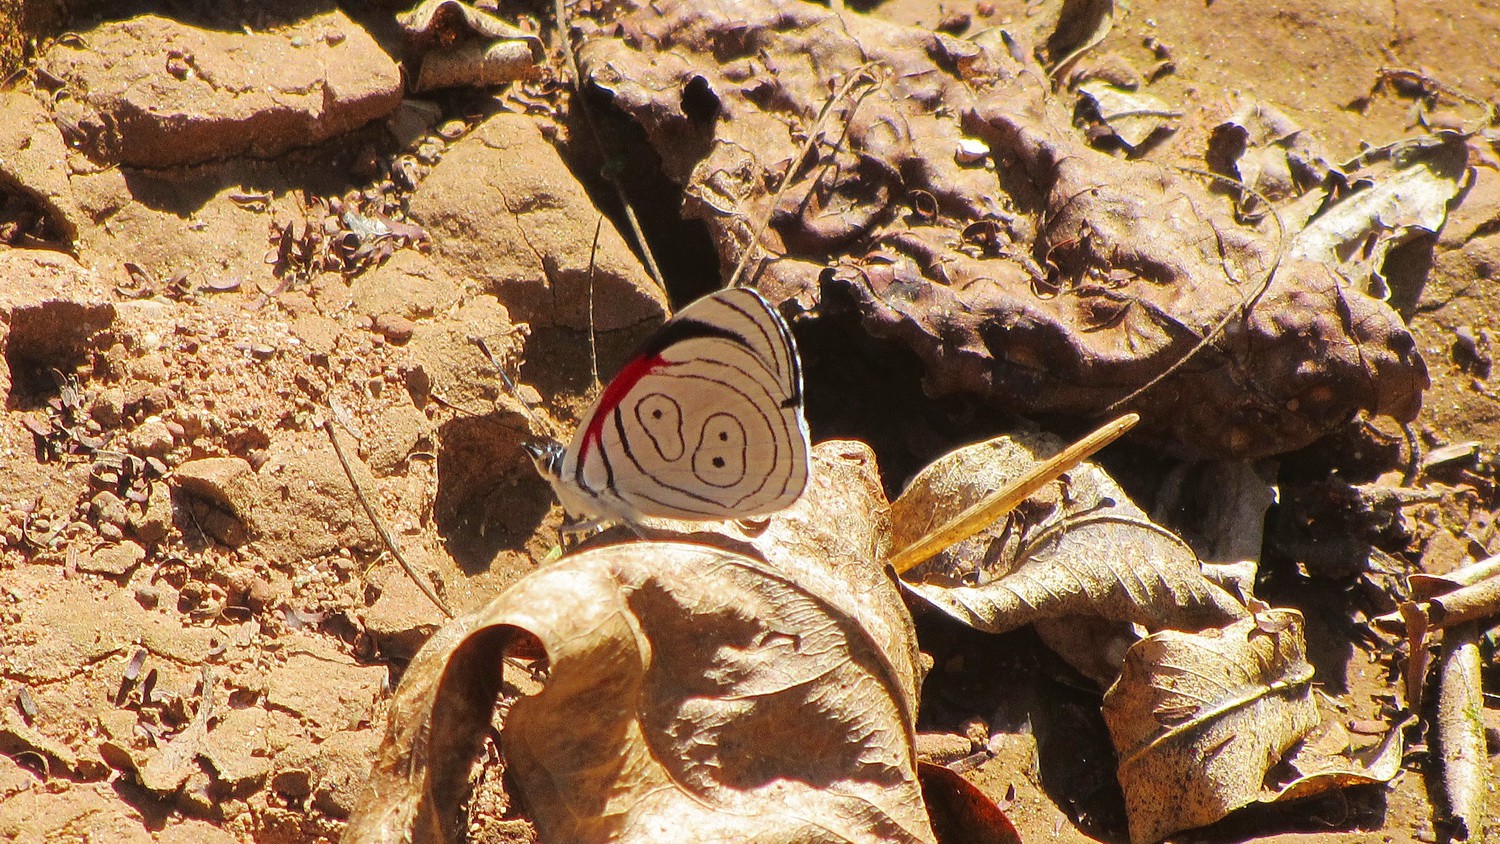 Butterfly with circles on shore of Rio Negrito in the Parque Nacional Calilegua